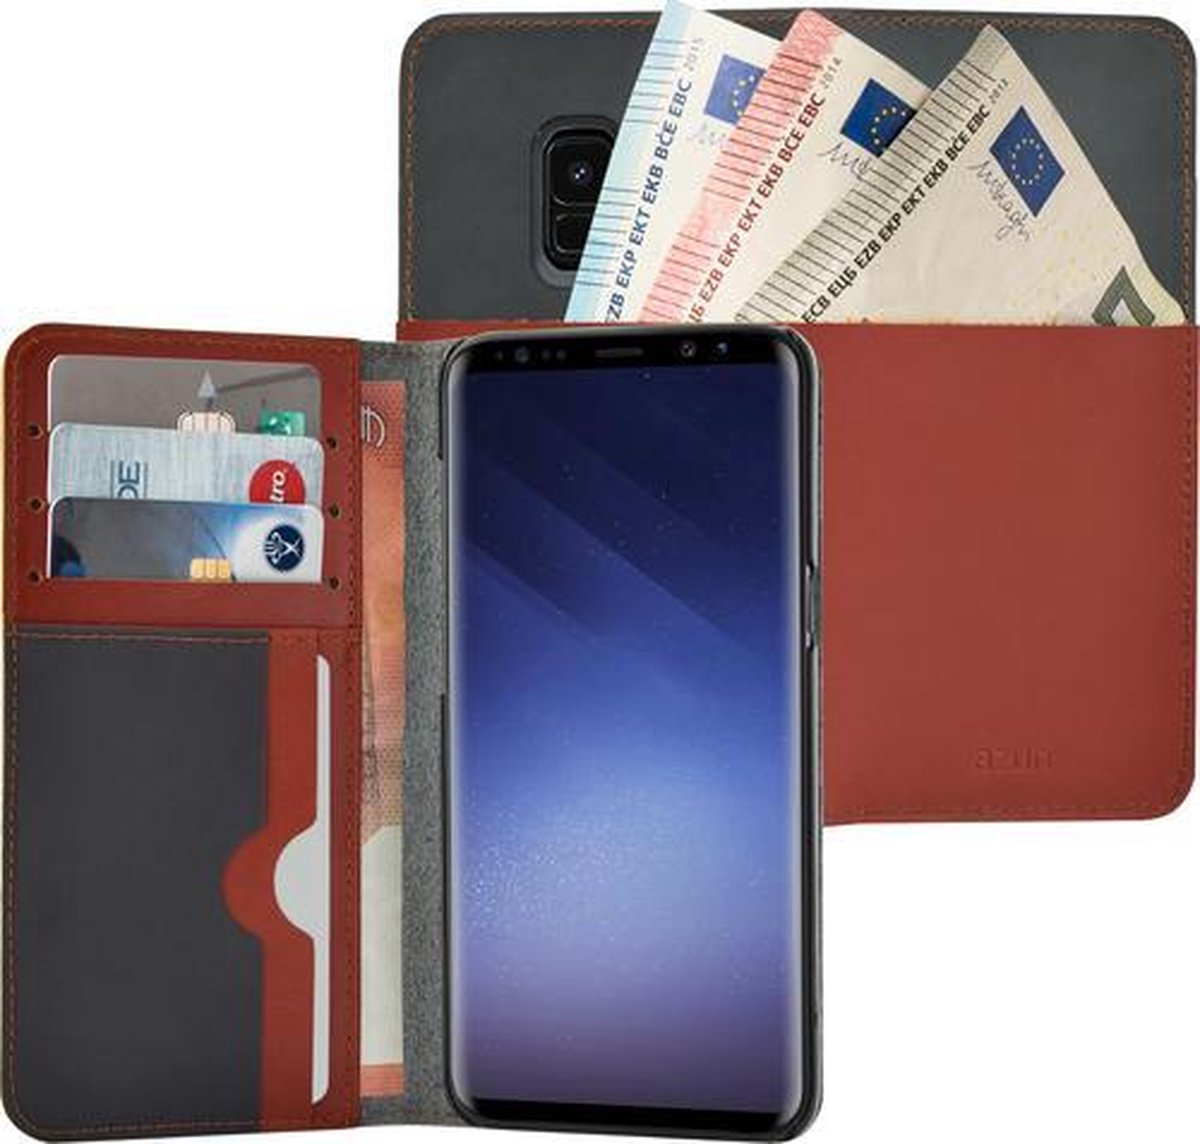 MH by Azuri walletcase with cardslots and money pocket - camel - Samsung S9